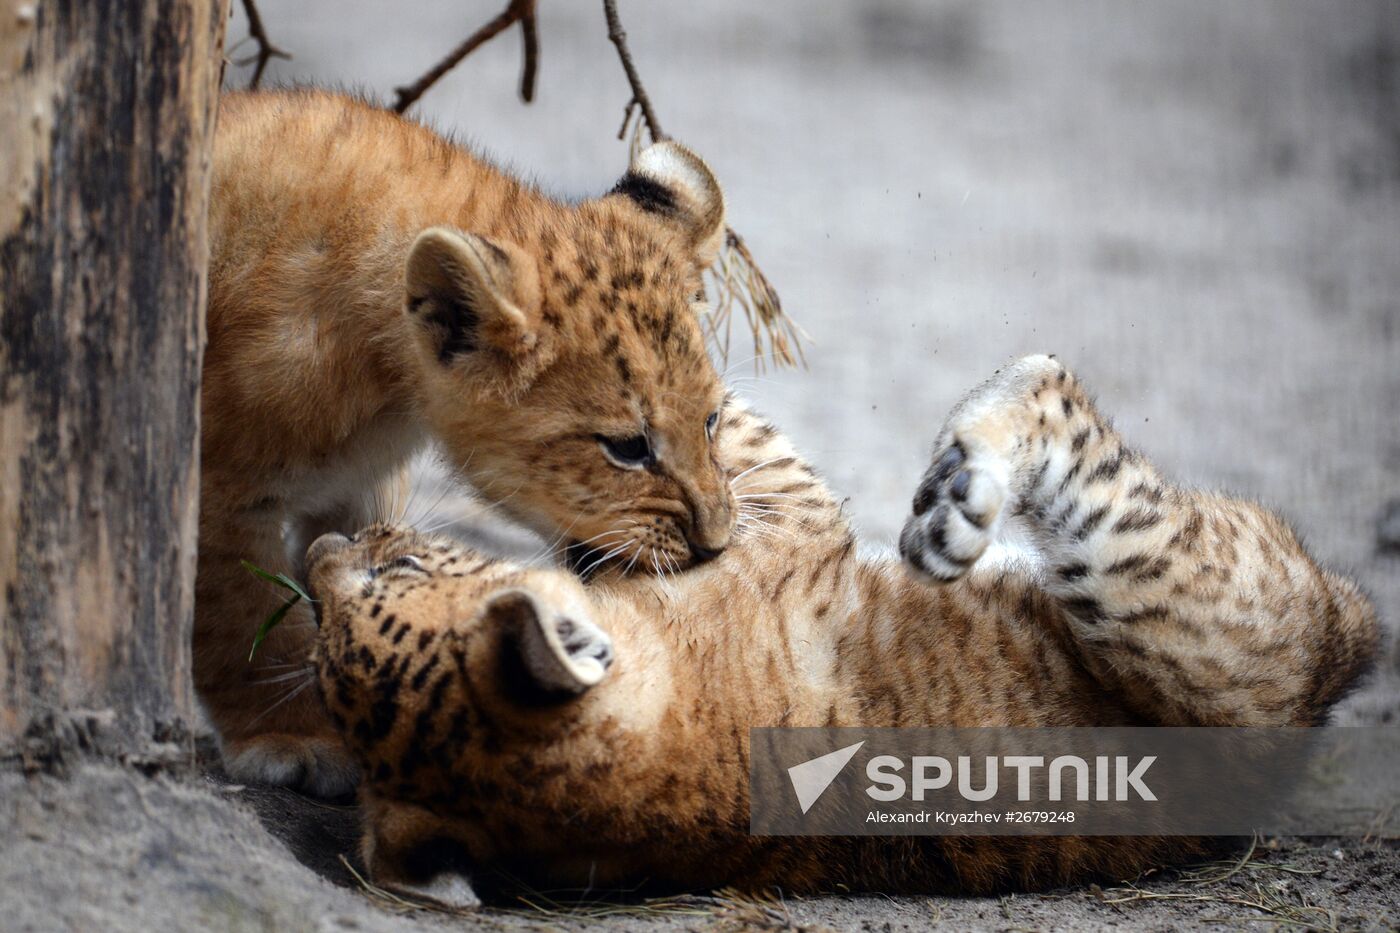 Ligress gives birth to new cubs in Novosibirsk Zoo